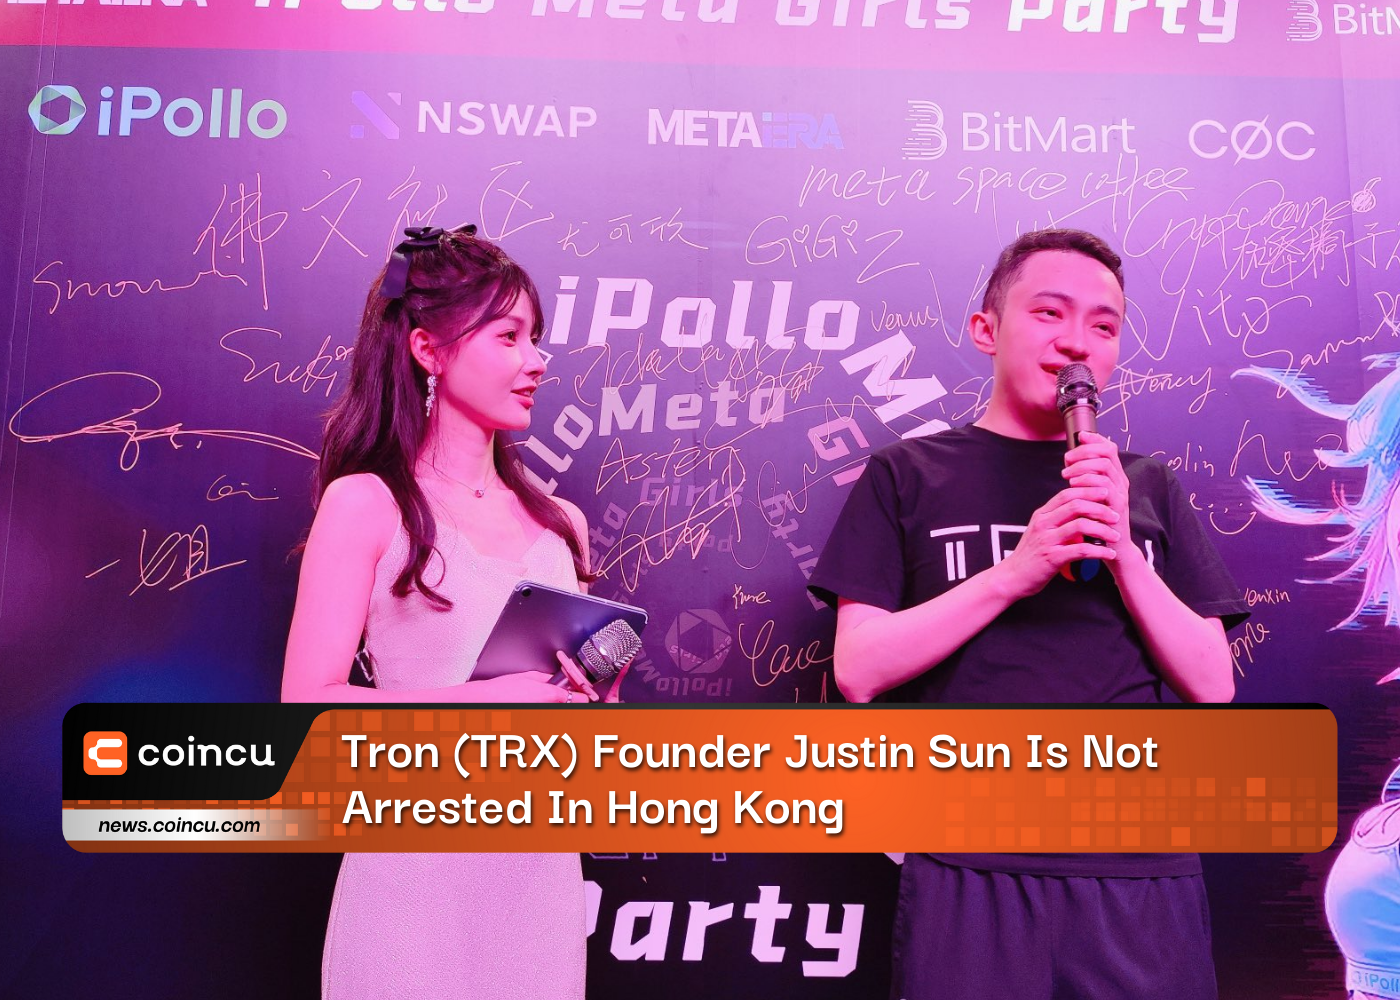 Tron (TRX) Founder Justin Sun Is Not Arrested In Hong Kong